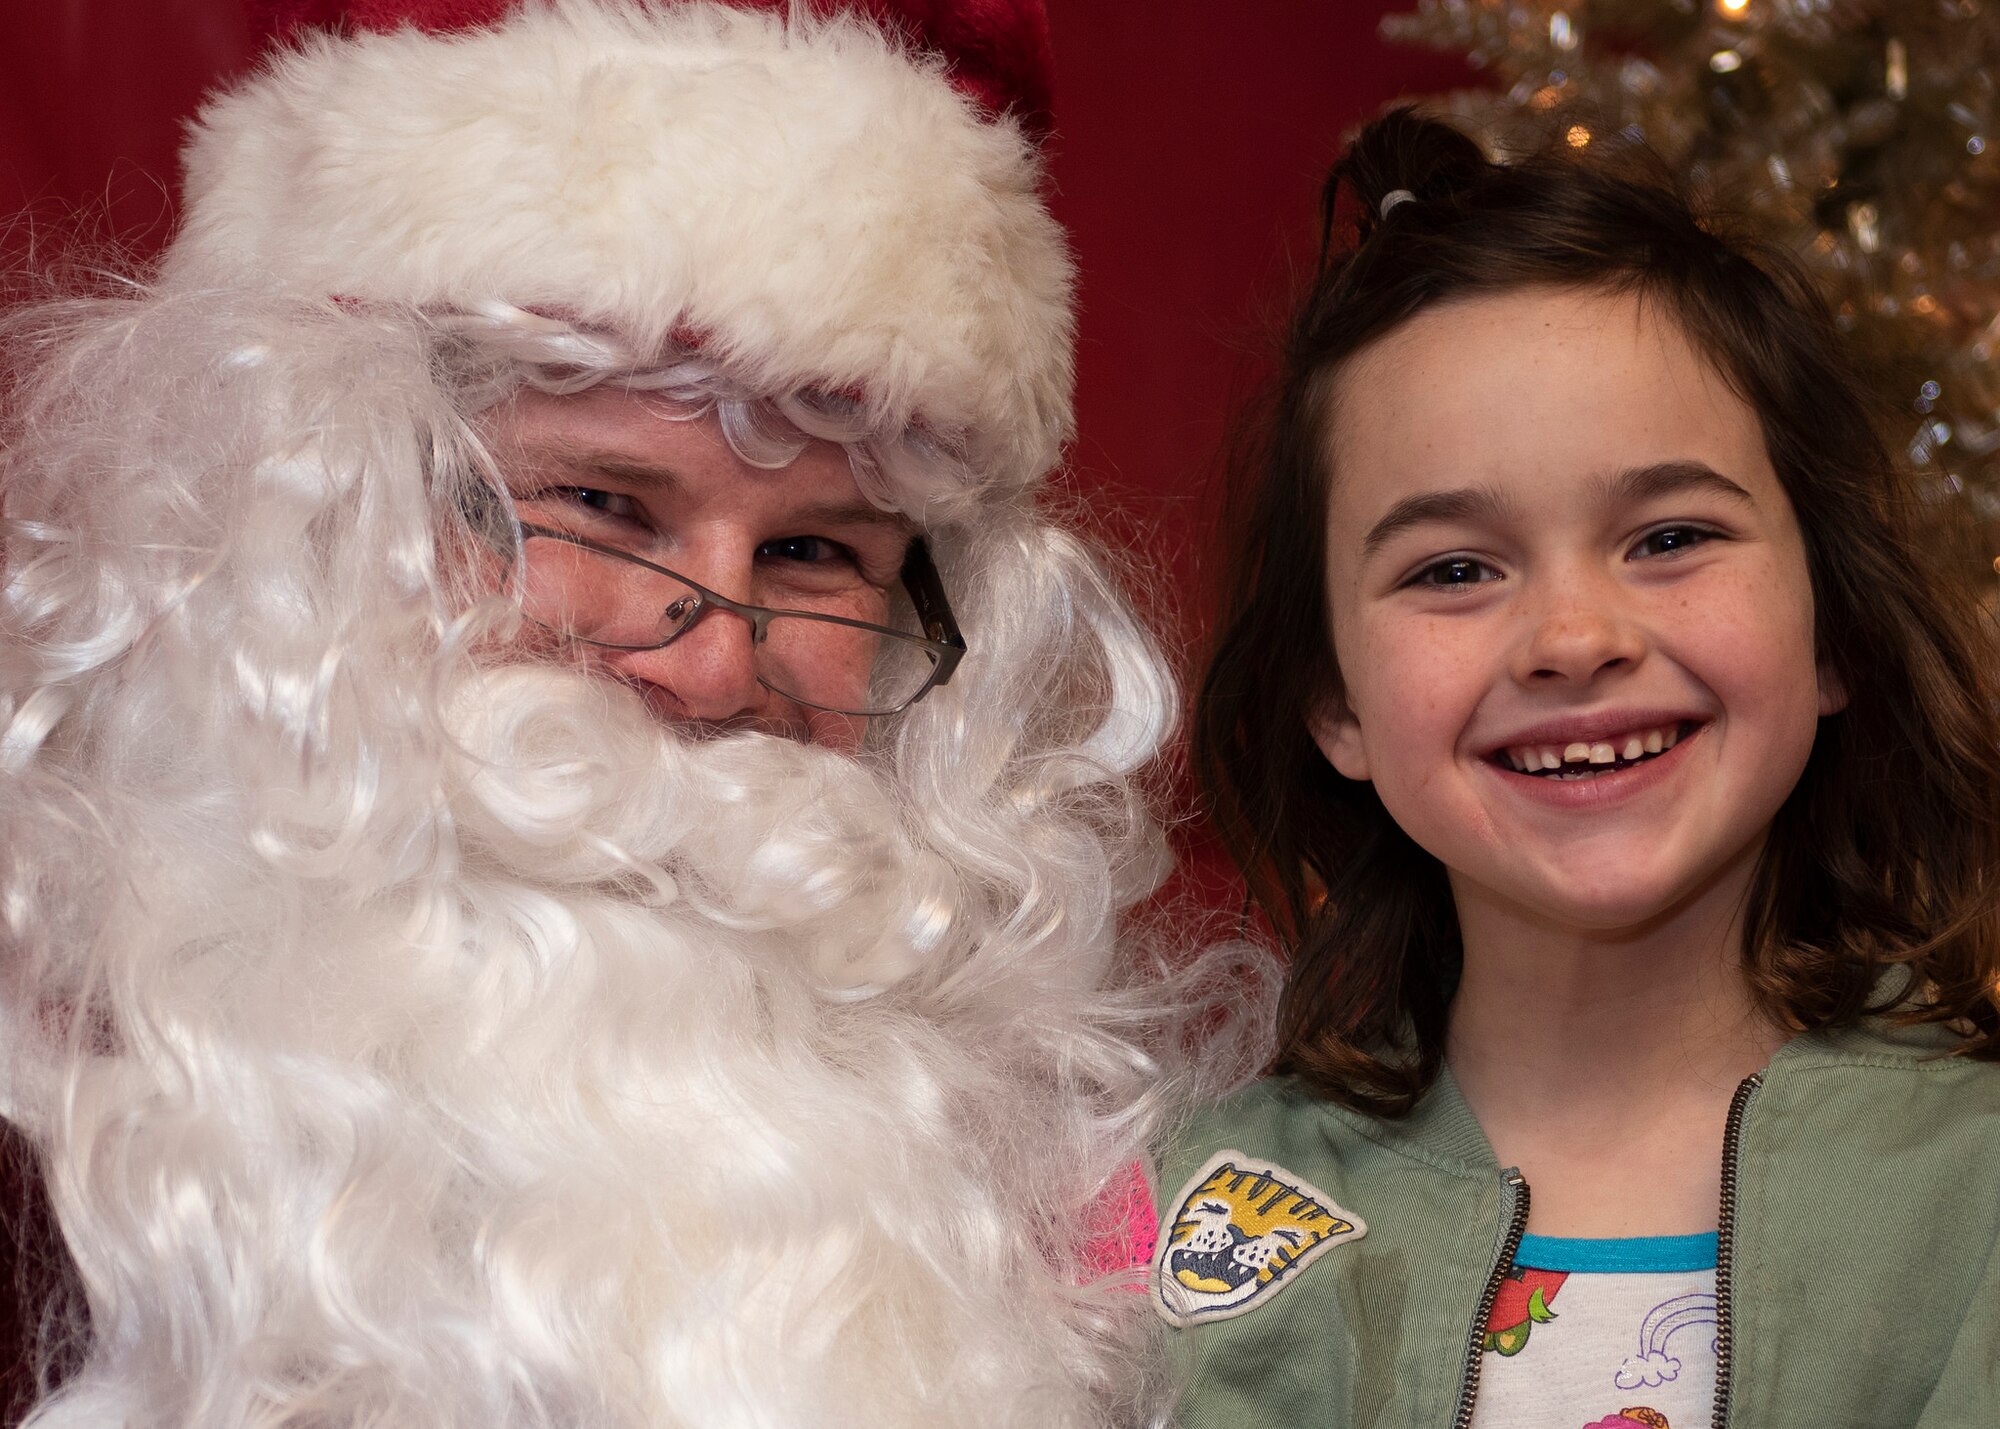 Emma Therrien poses for a picture with Santa Claus at Kirtland Air Force Base, N.M., Dec. 6, 2018. Children attending the Christmas tree lighting were able to get a pictures with Santa Claus and tell him what they wanted for Christmas. (U.S. Air Force photo by Airman 1st Class Austin J. Prisbrey)